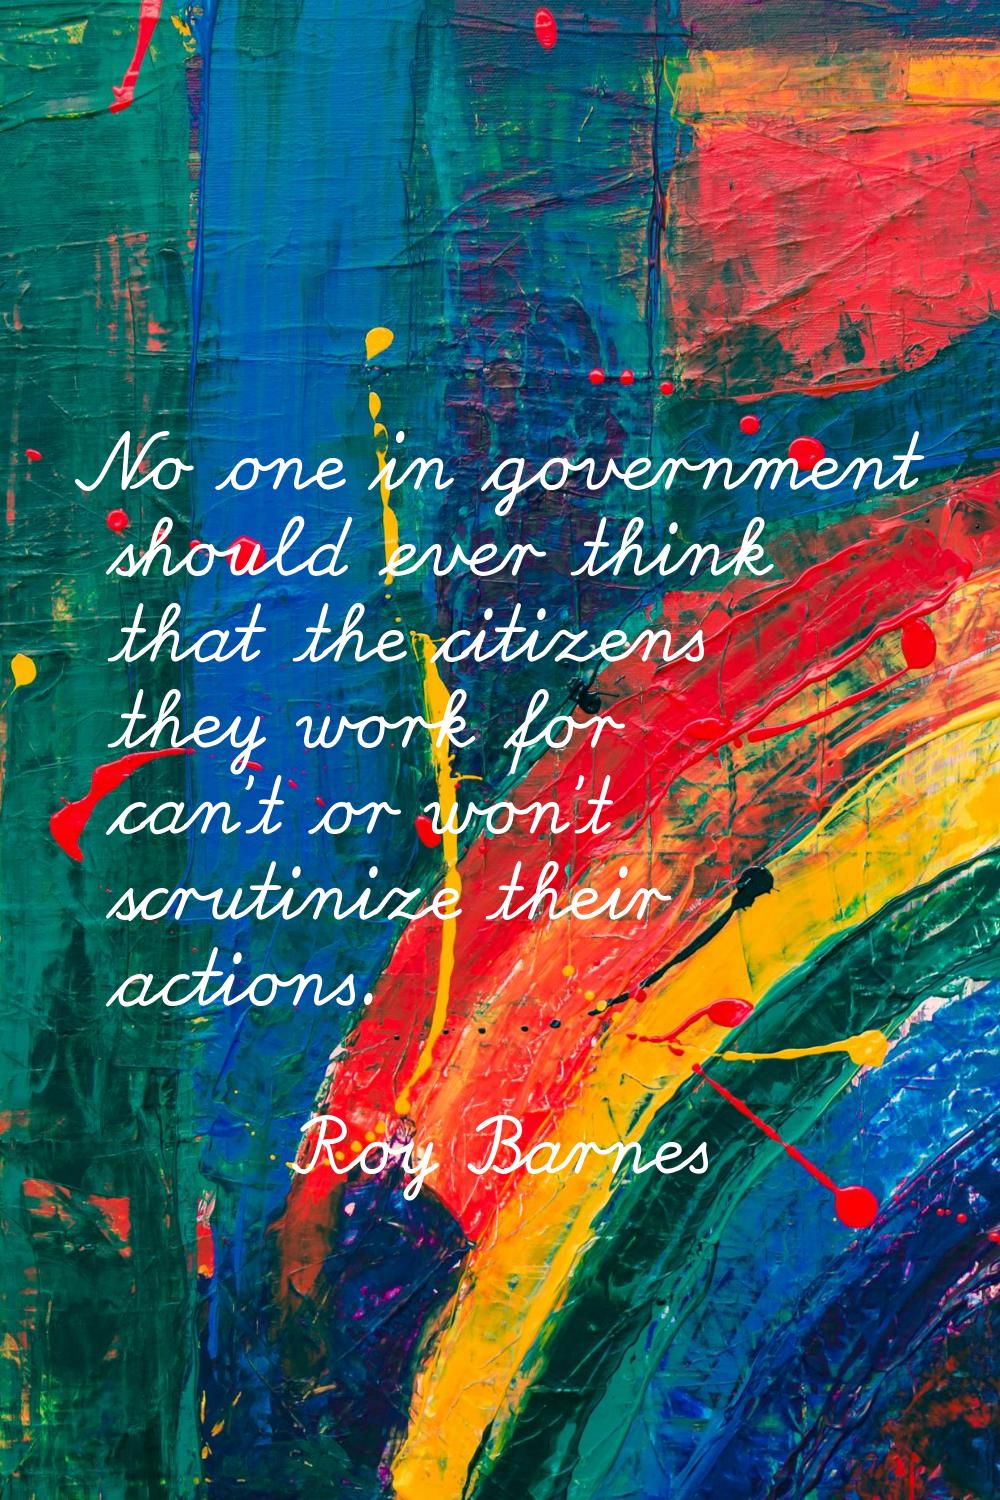 No one in government should ever think that the citizens they work for can't or won't scrutinize th